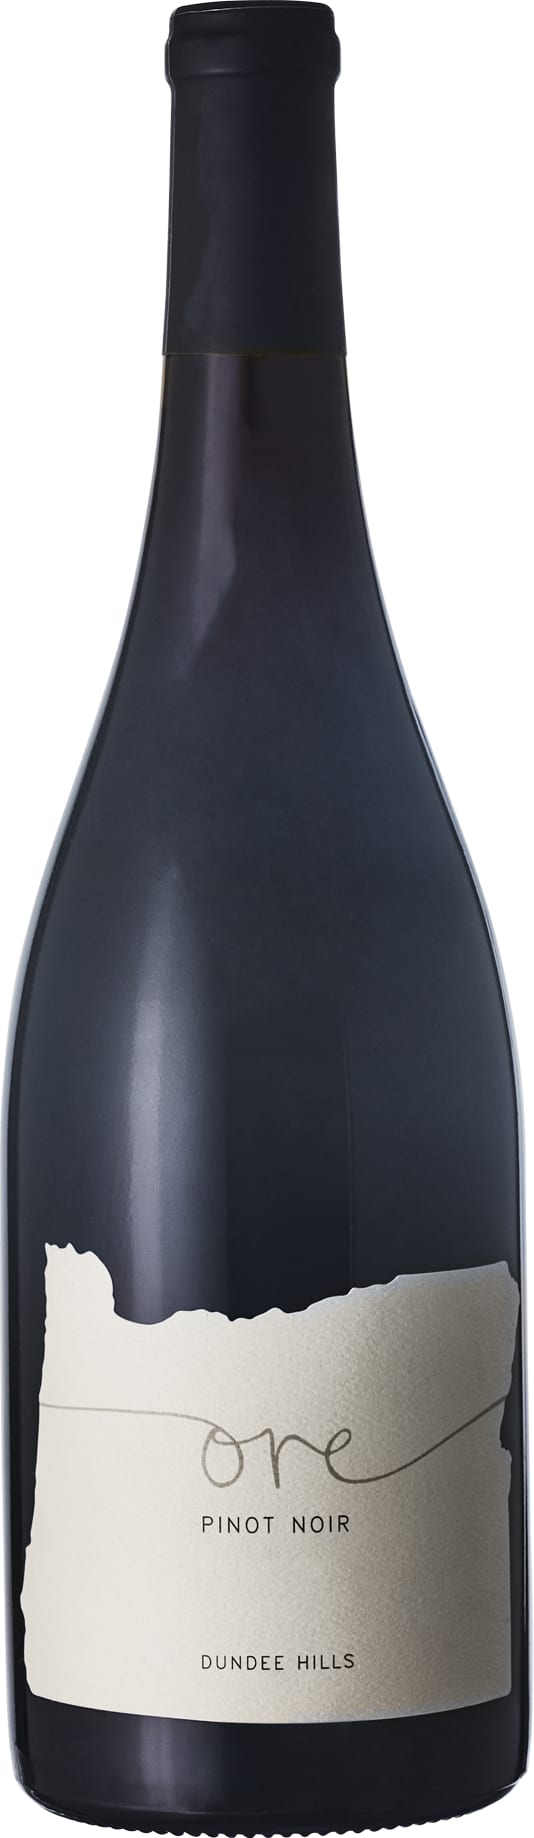 Ore Winery Pinot Noir, Oregon - Dundee Hills 2017 75cl - Buy Ore Winery Wines from GREAT WINES DIRECT wine shop